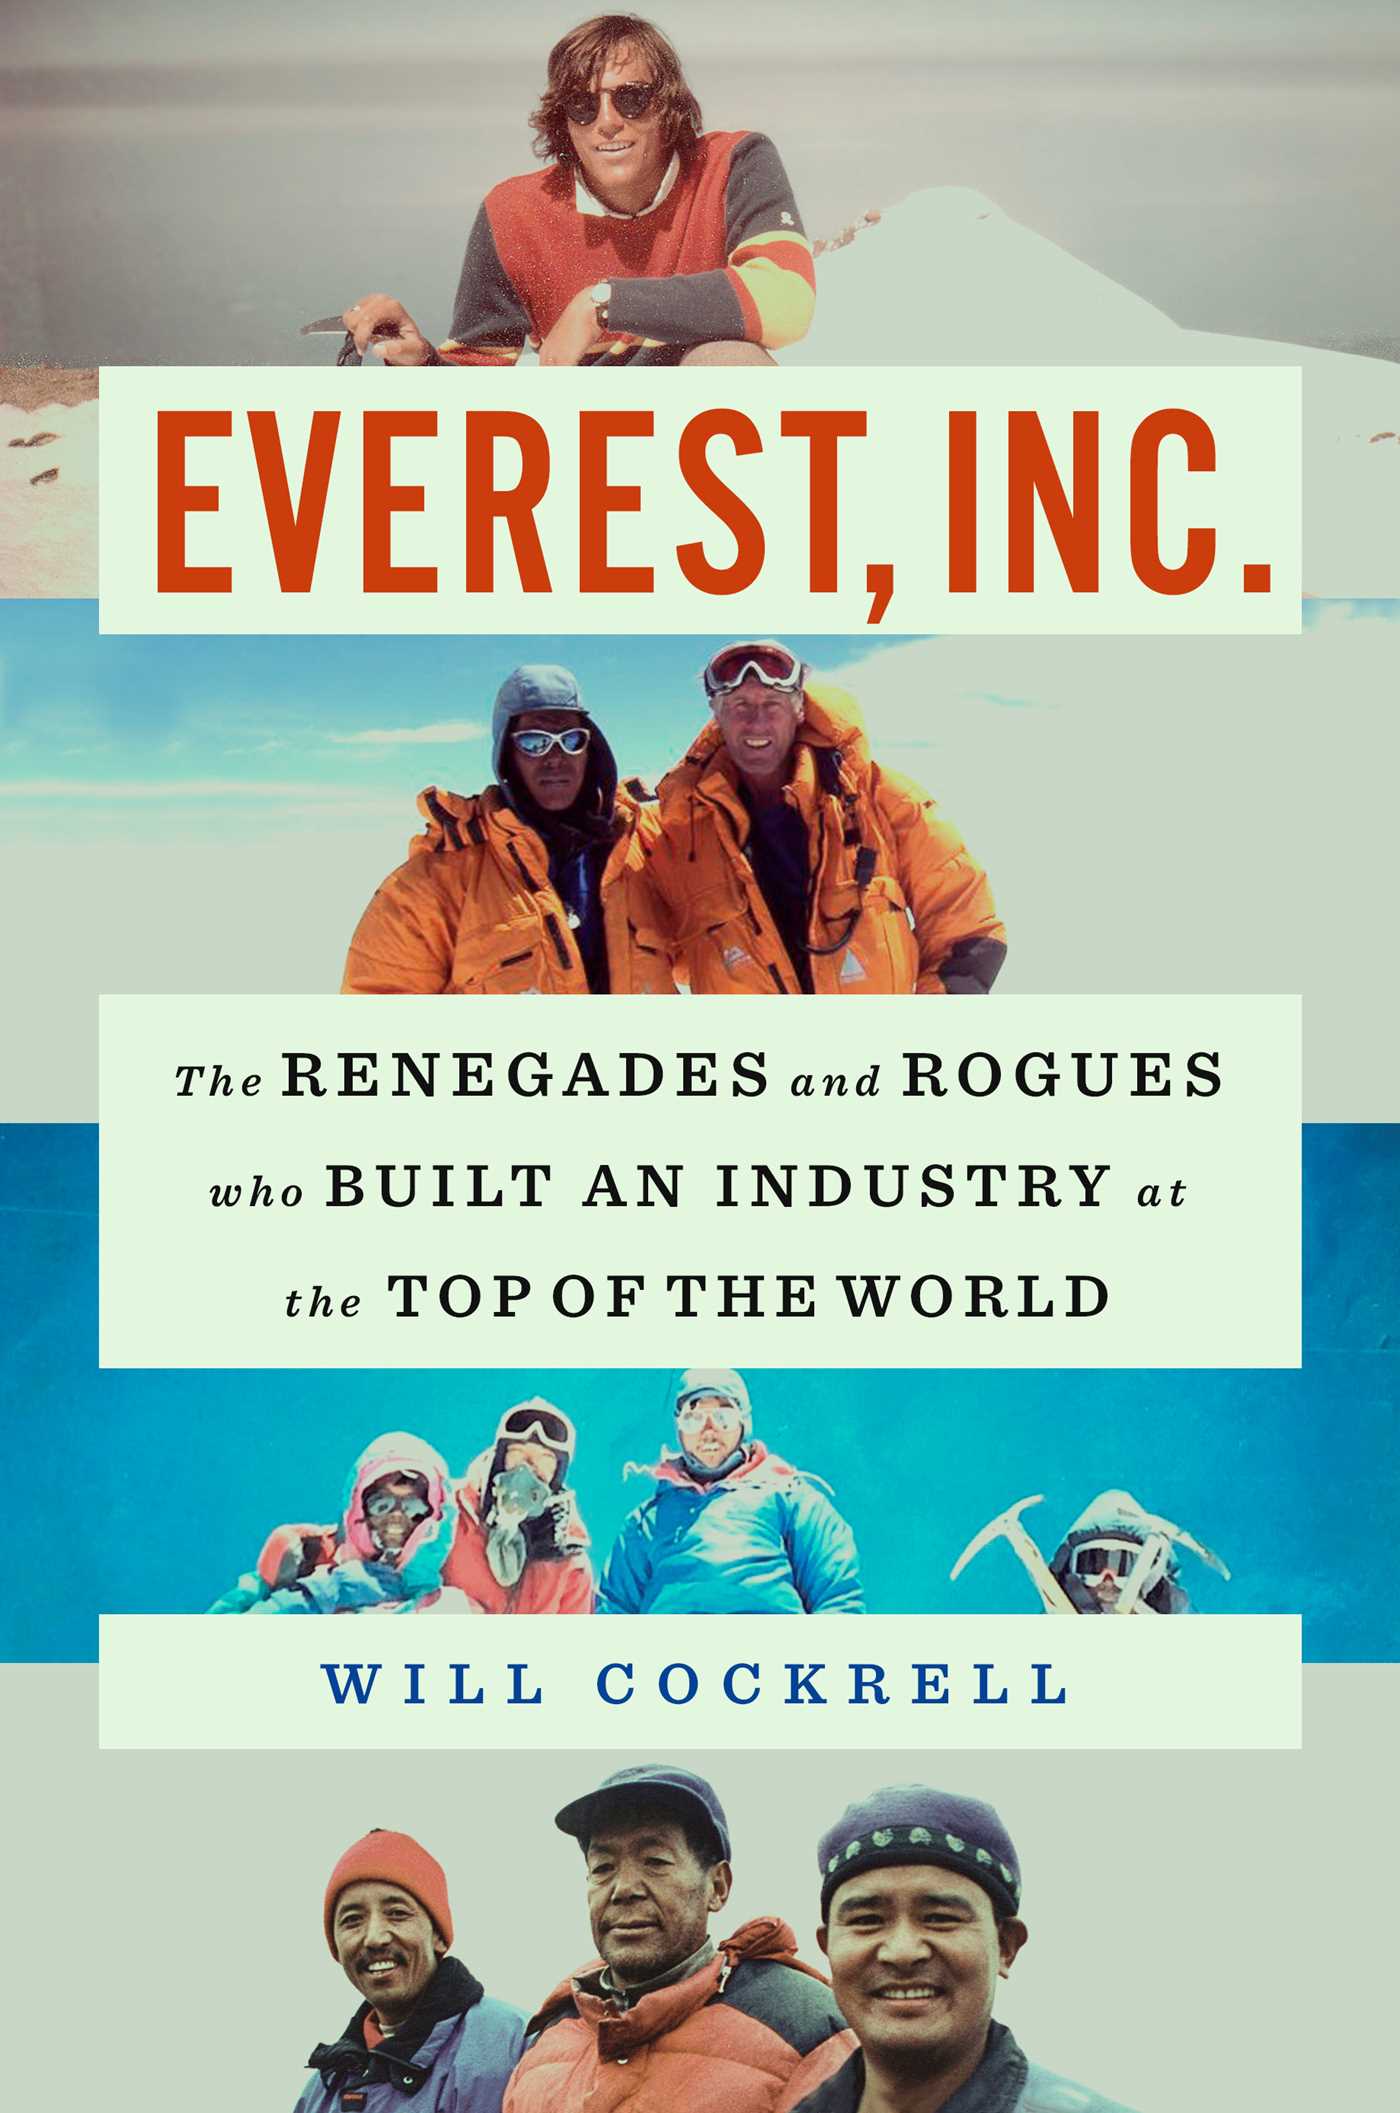 The cover of Will Cockrell's new book EVEREST, INC.